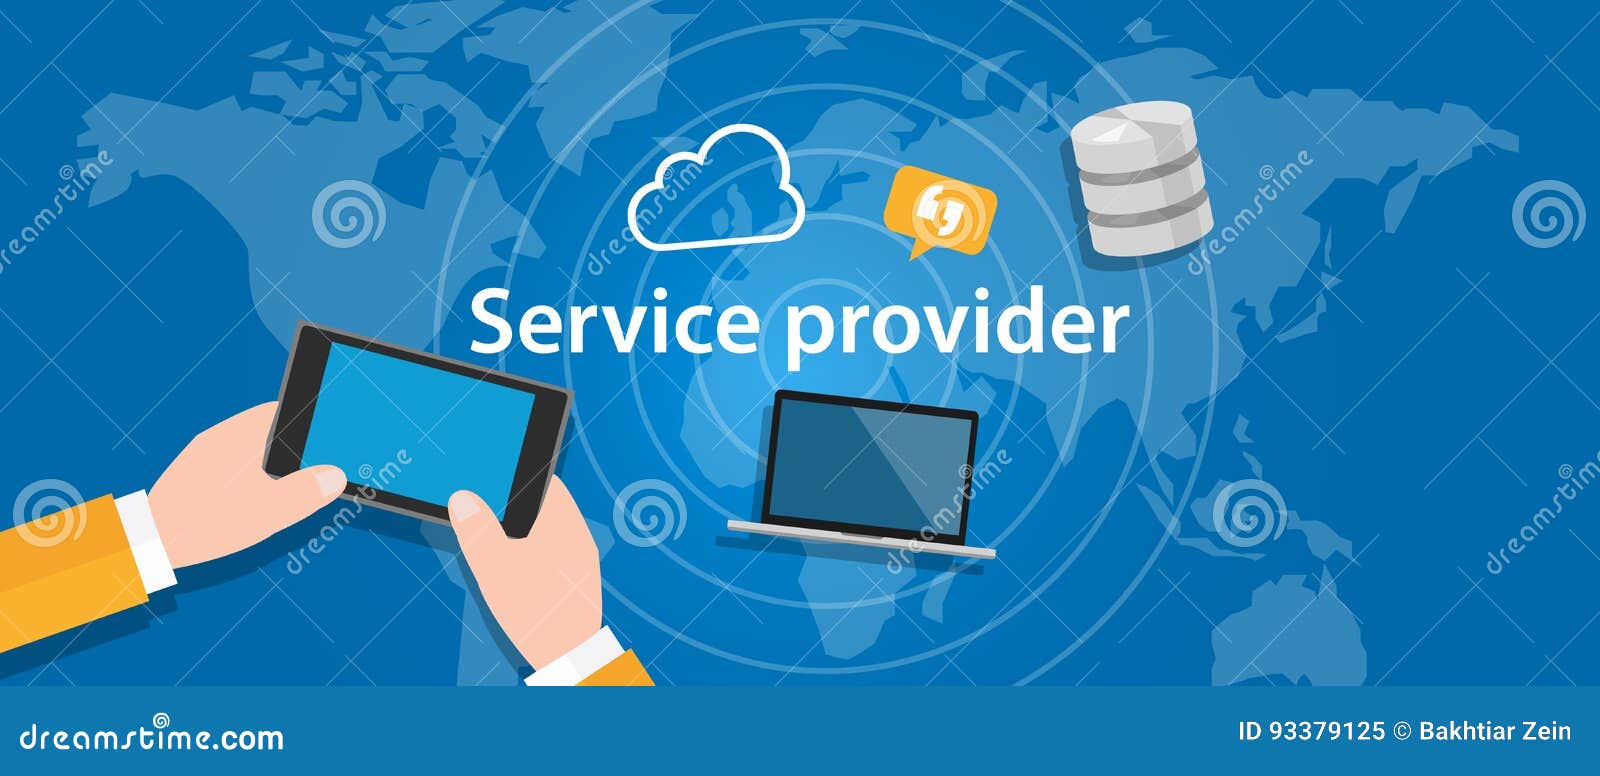 service provider for internet network business connect